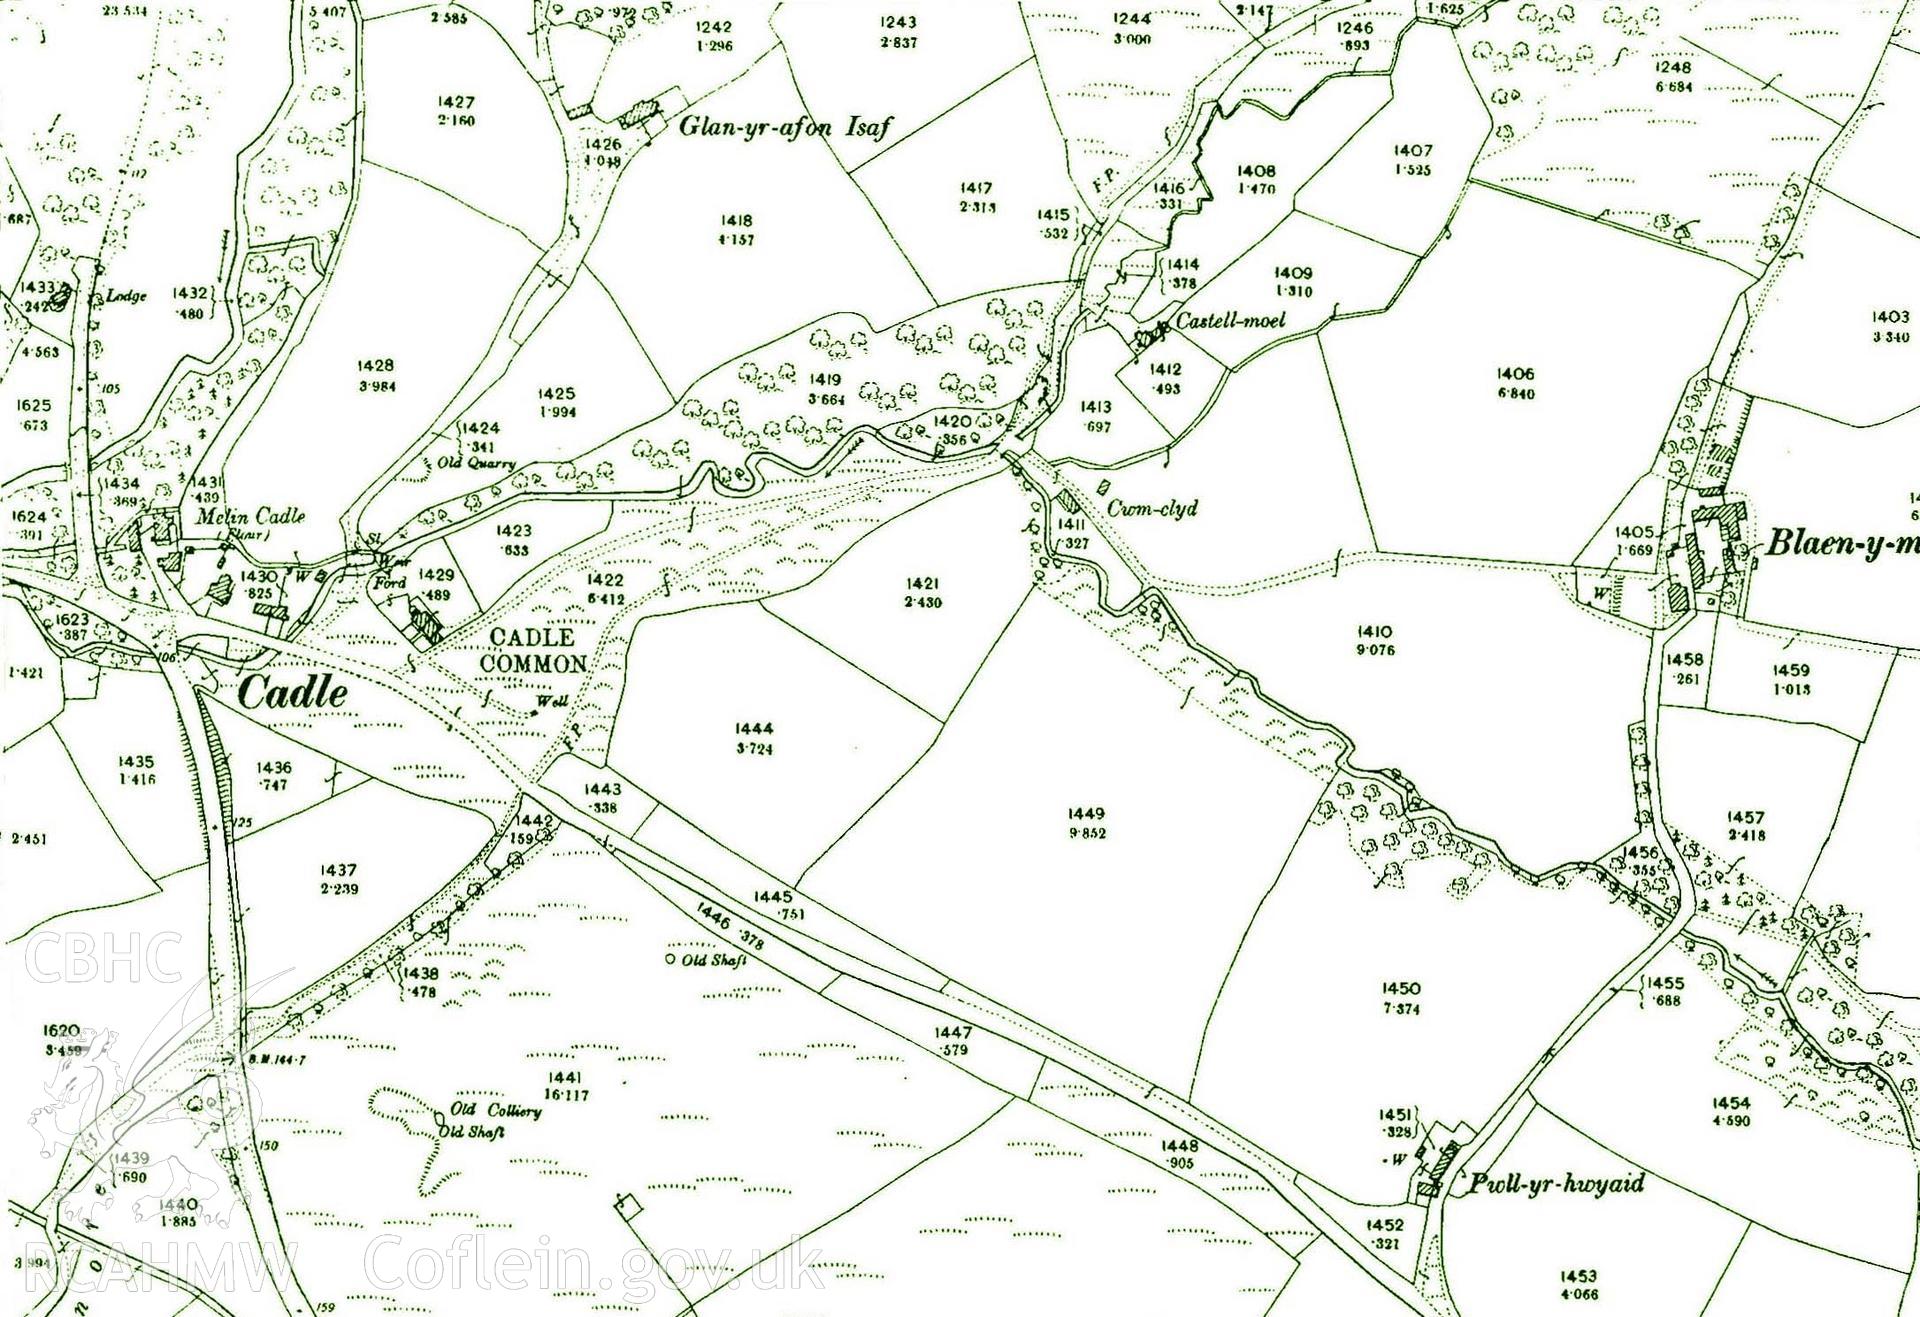 Digital copy of part of OS map sheet XIV. 16 N. It depicts part of the Penllergare Estate.